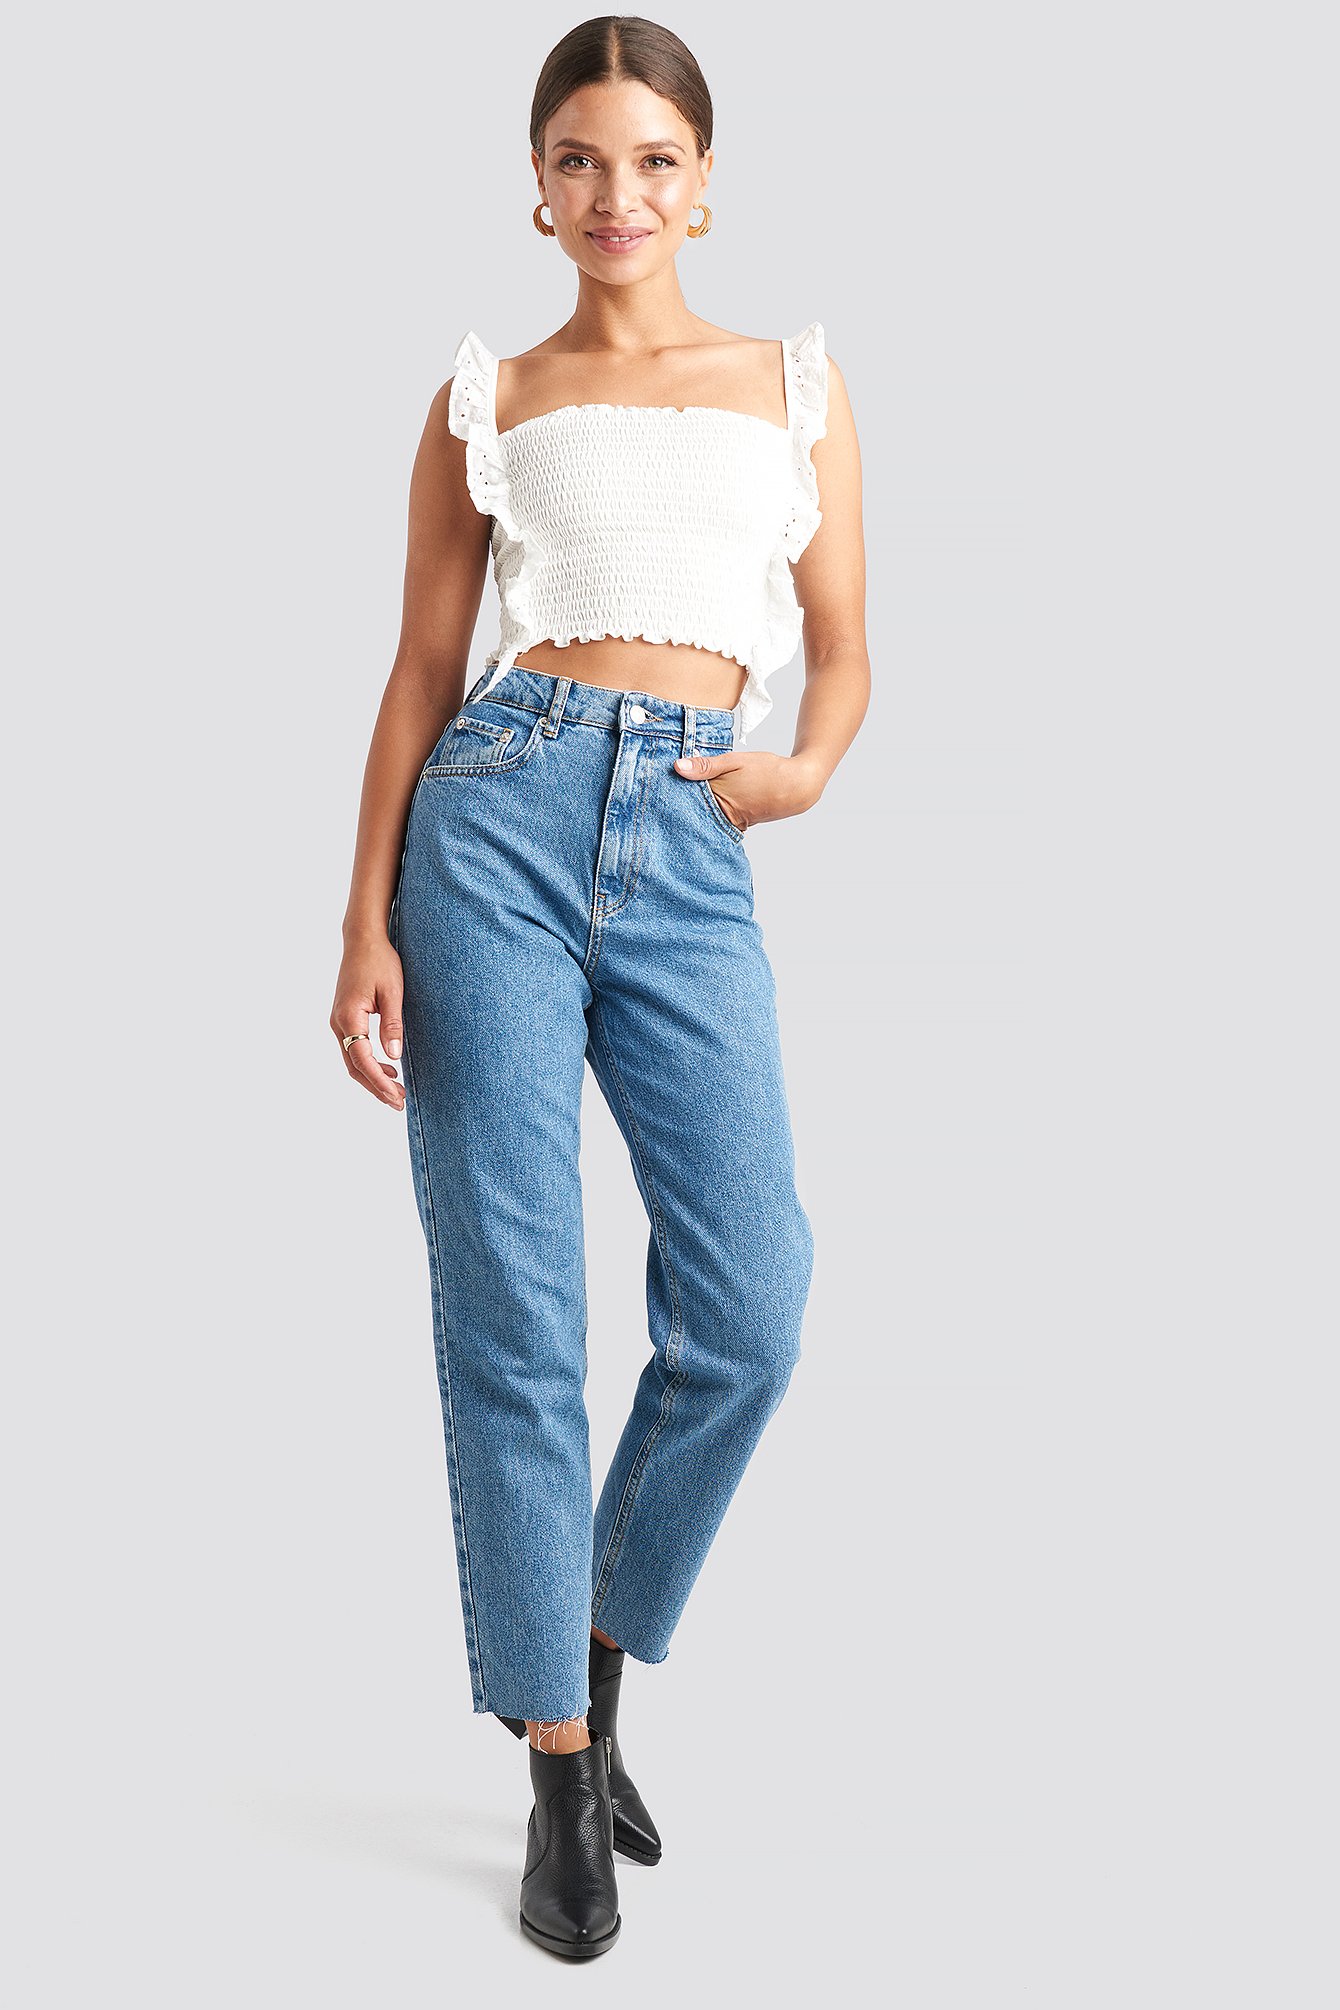 Broderie Anglais Ruffle Crop Top Outfit.